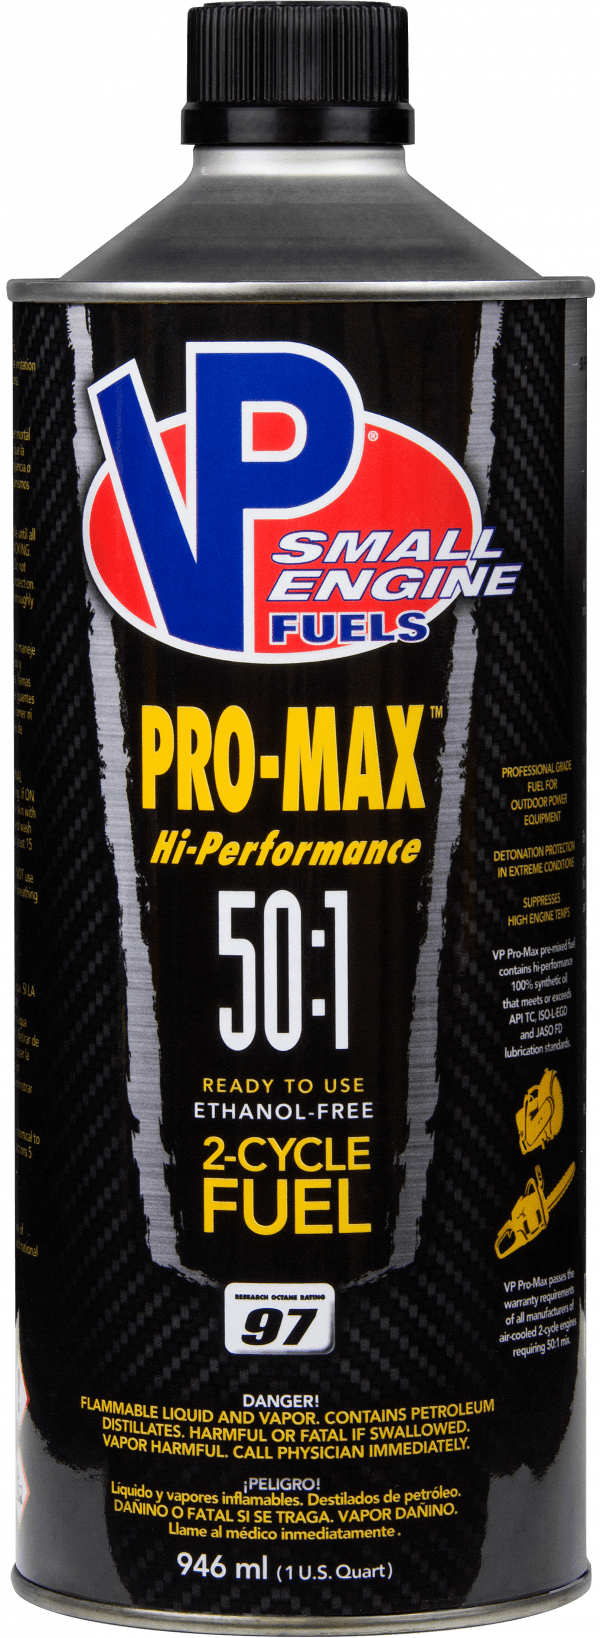 VP ProMax 50:1 premix 2 cycle fuel (97 octane for professional use)